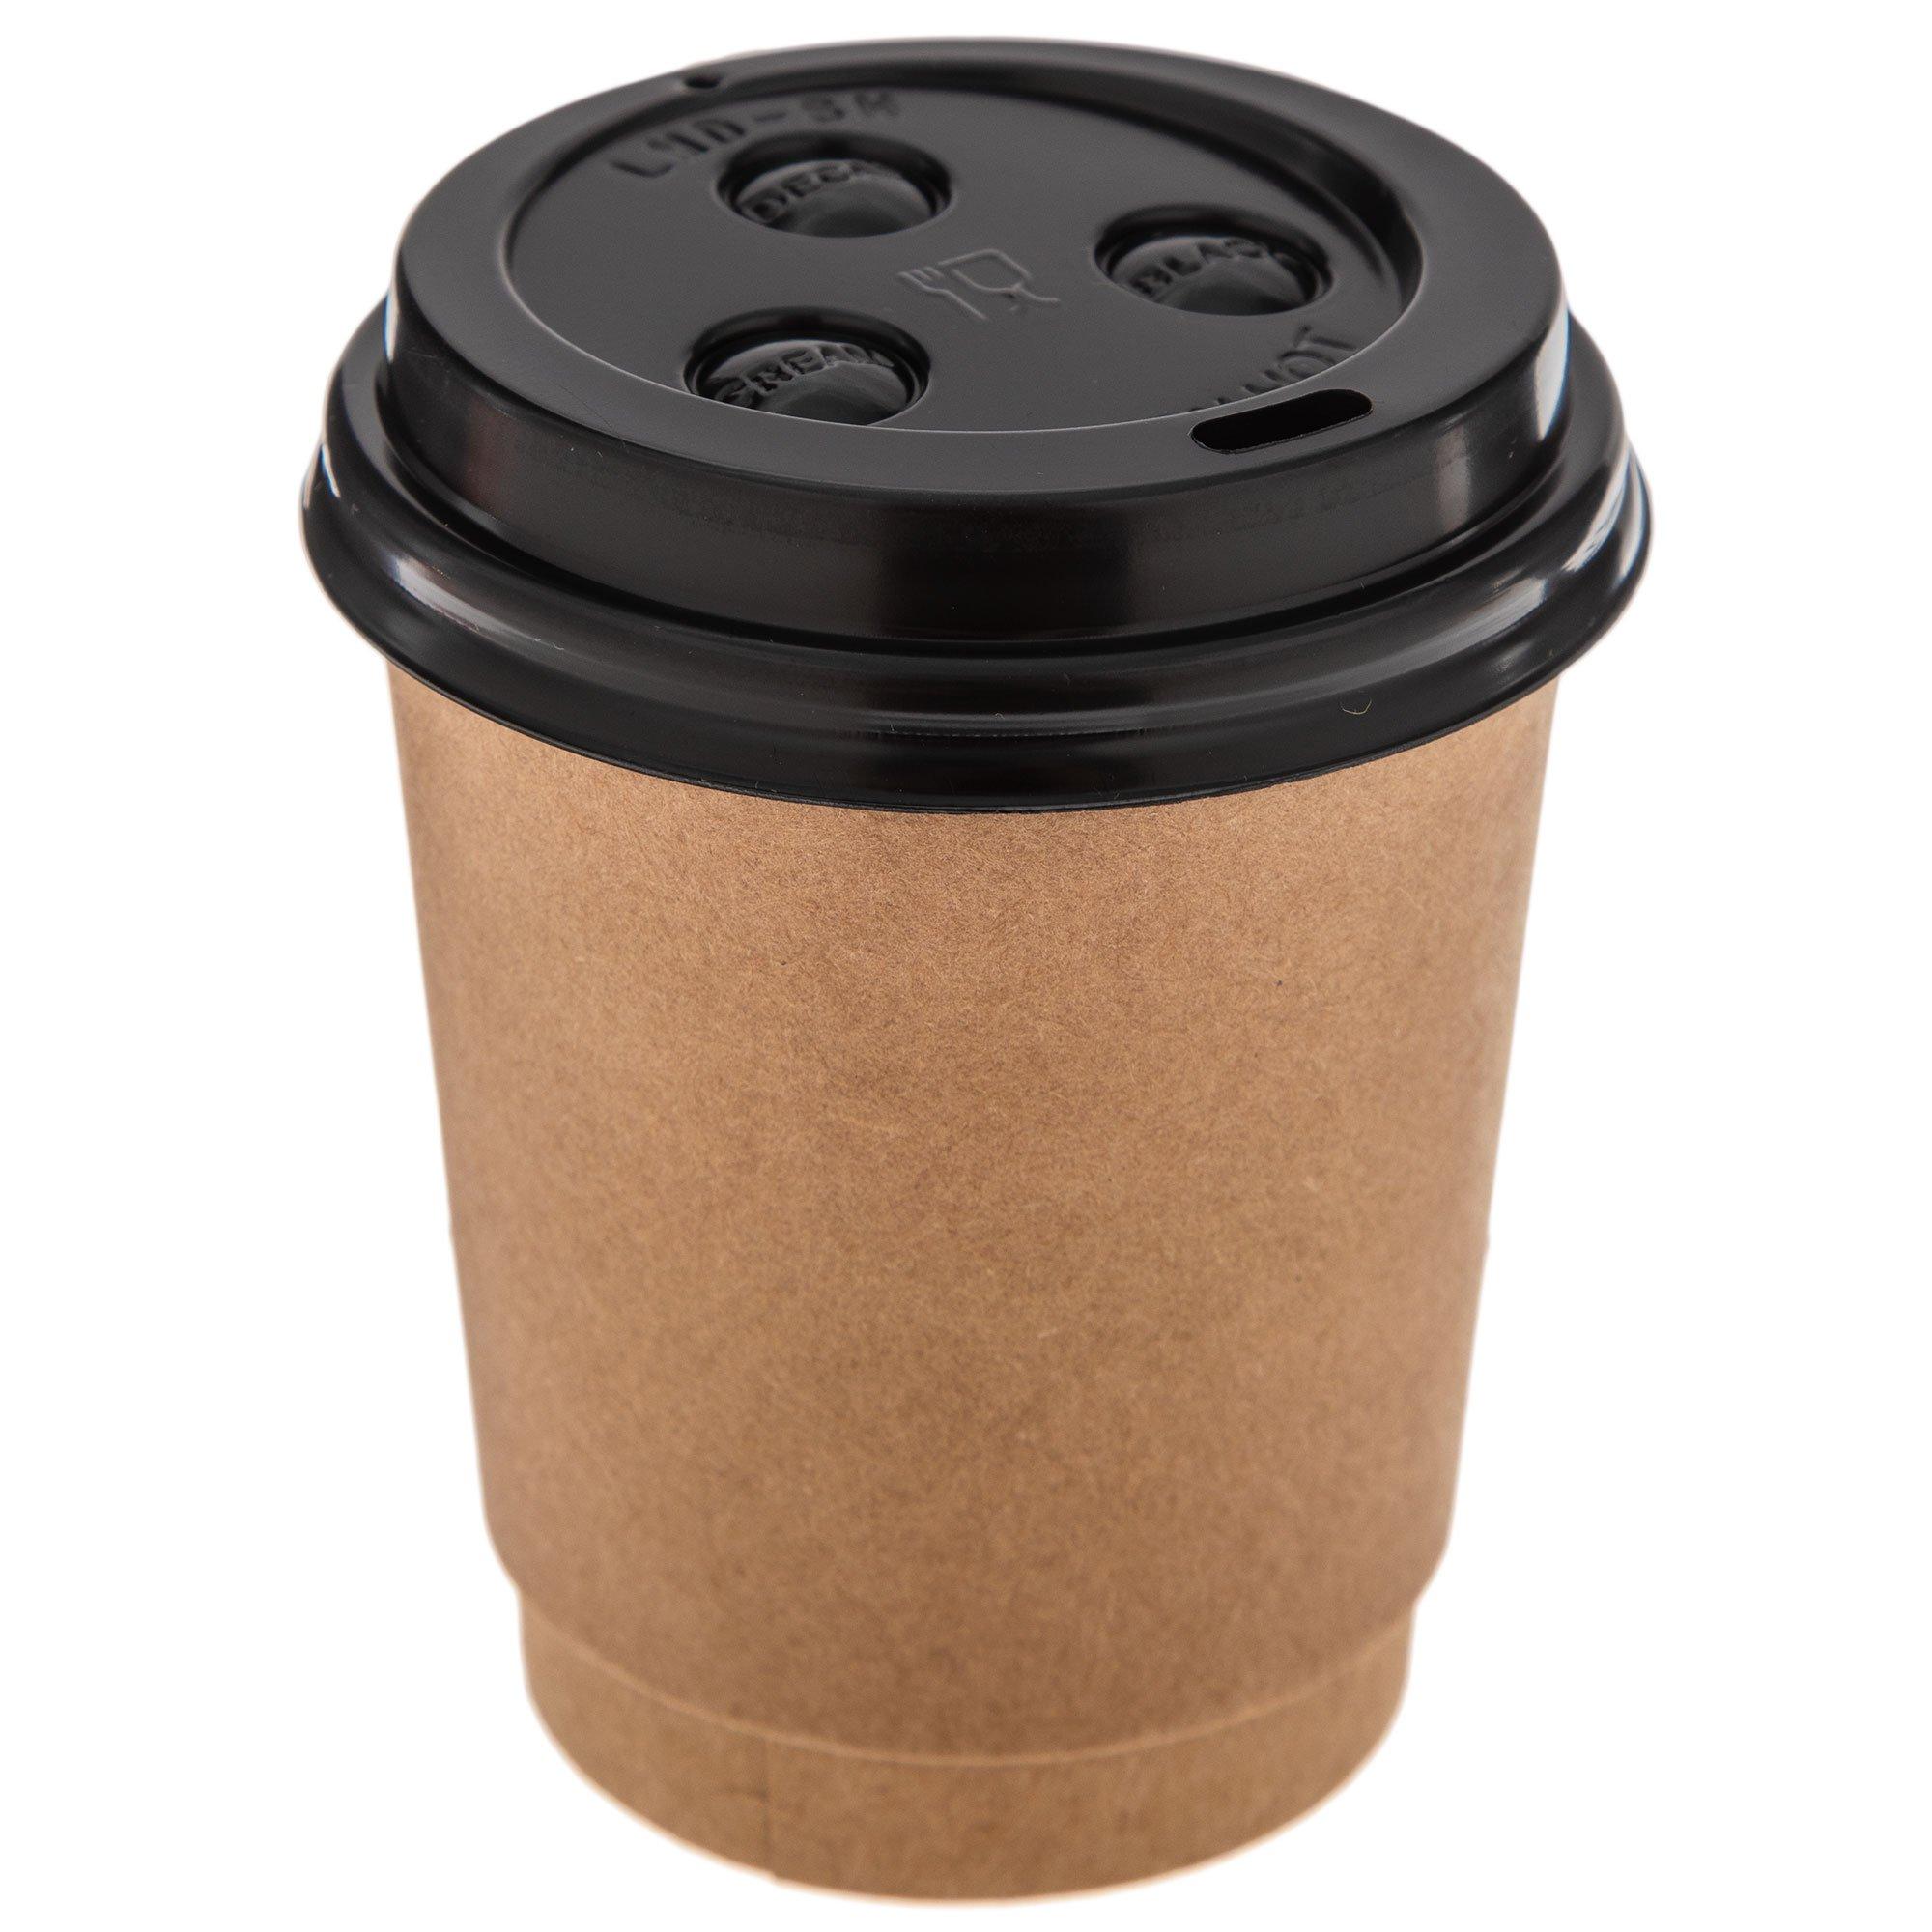 Disposable Coffee Cups with Lids - 16 oz to Go Coffee Cups (90 Set) with Sleeves